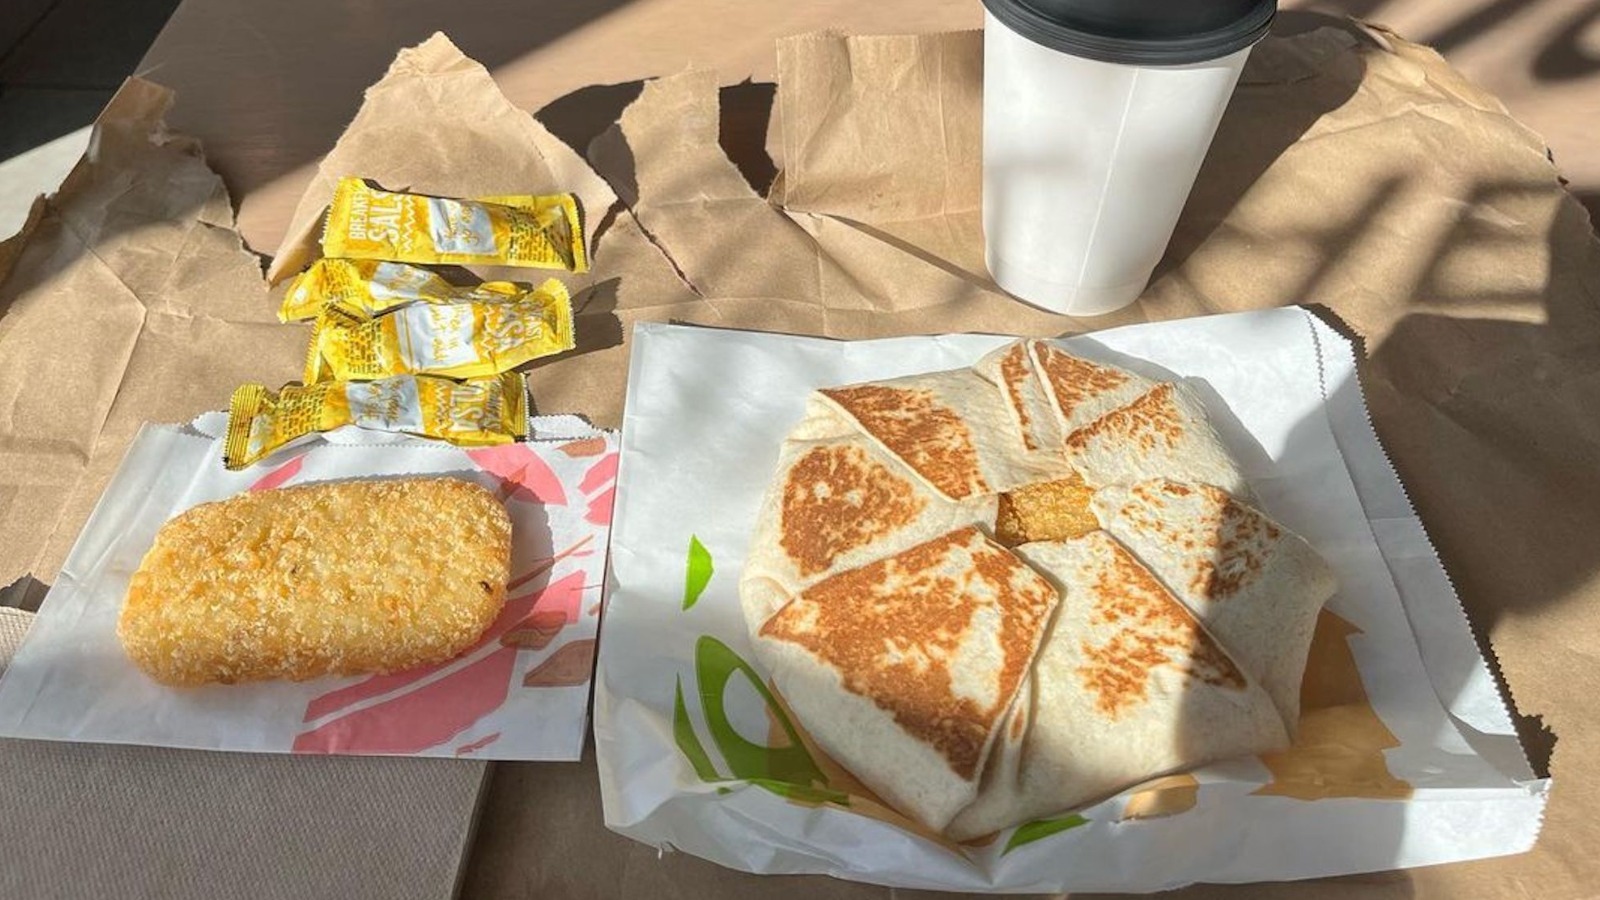 https://www.mashed.com/img/gallery/taco-bell-just-launched-a-breakfast-deal-that-checks-all-the-boxes/l-intro-1661367644.jpg